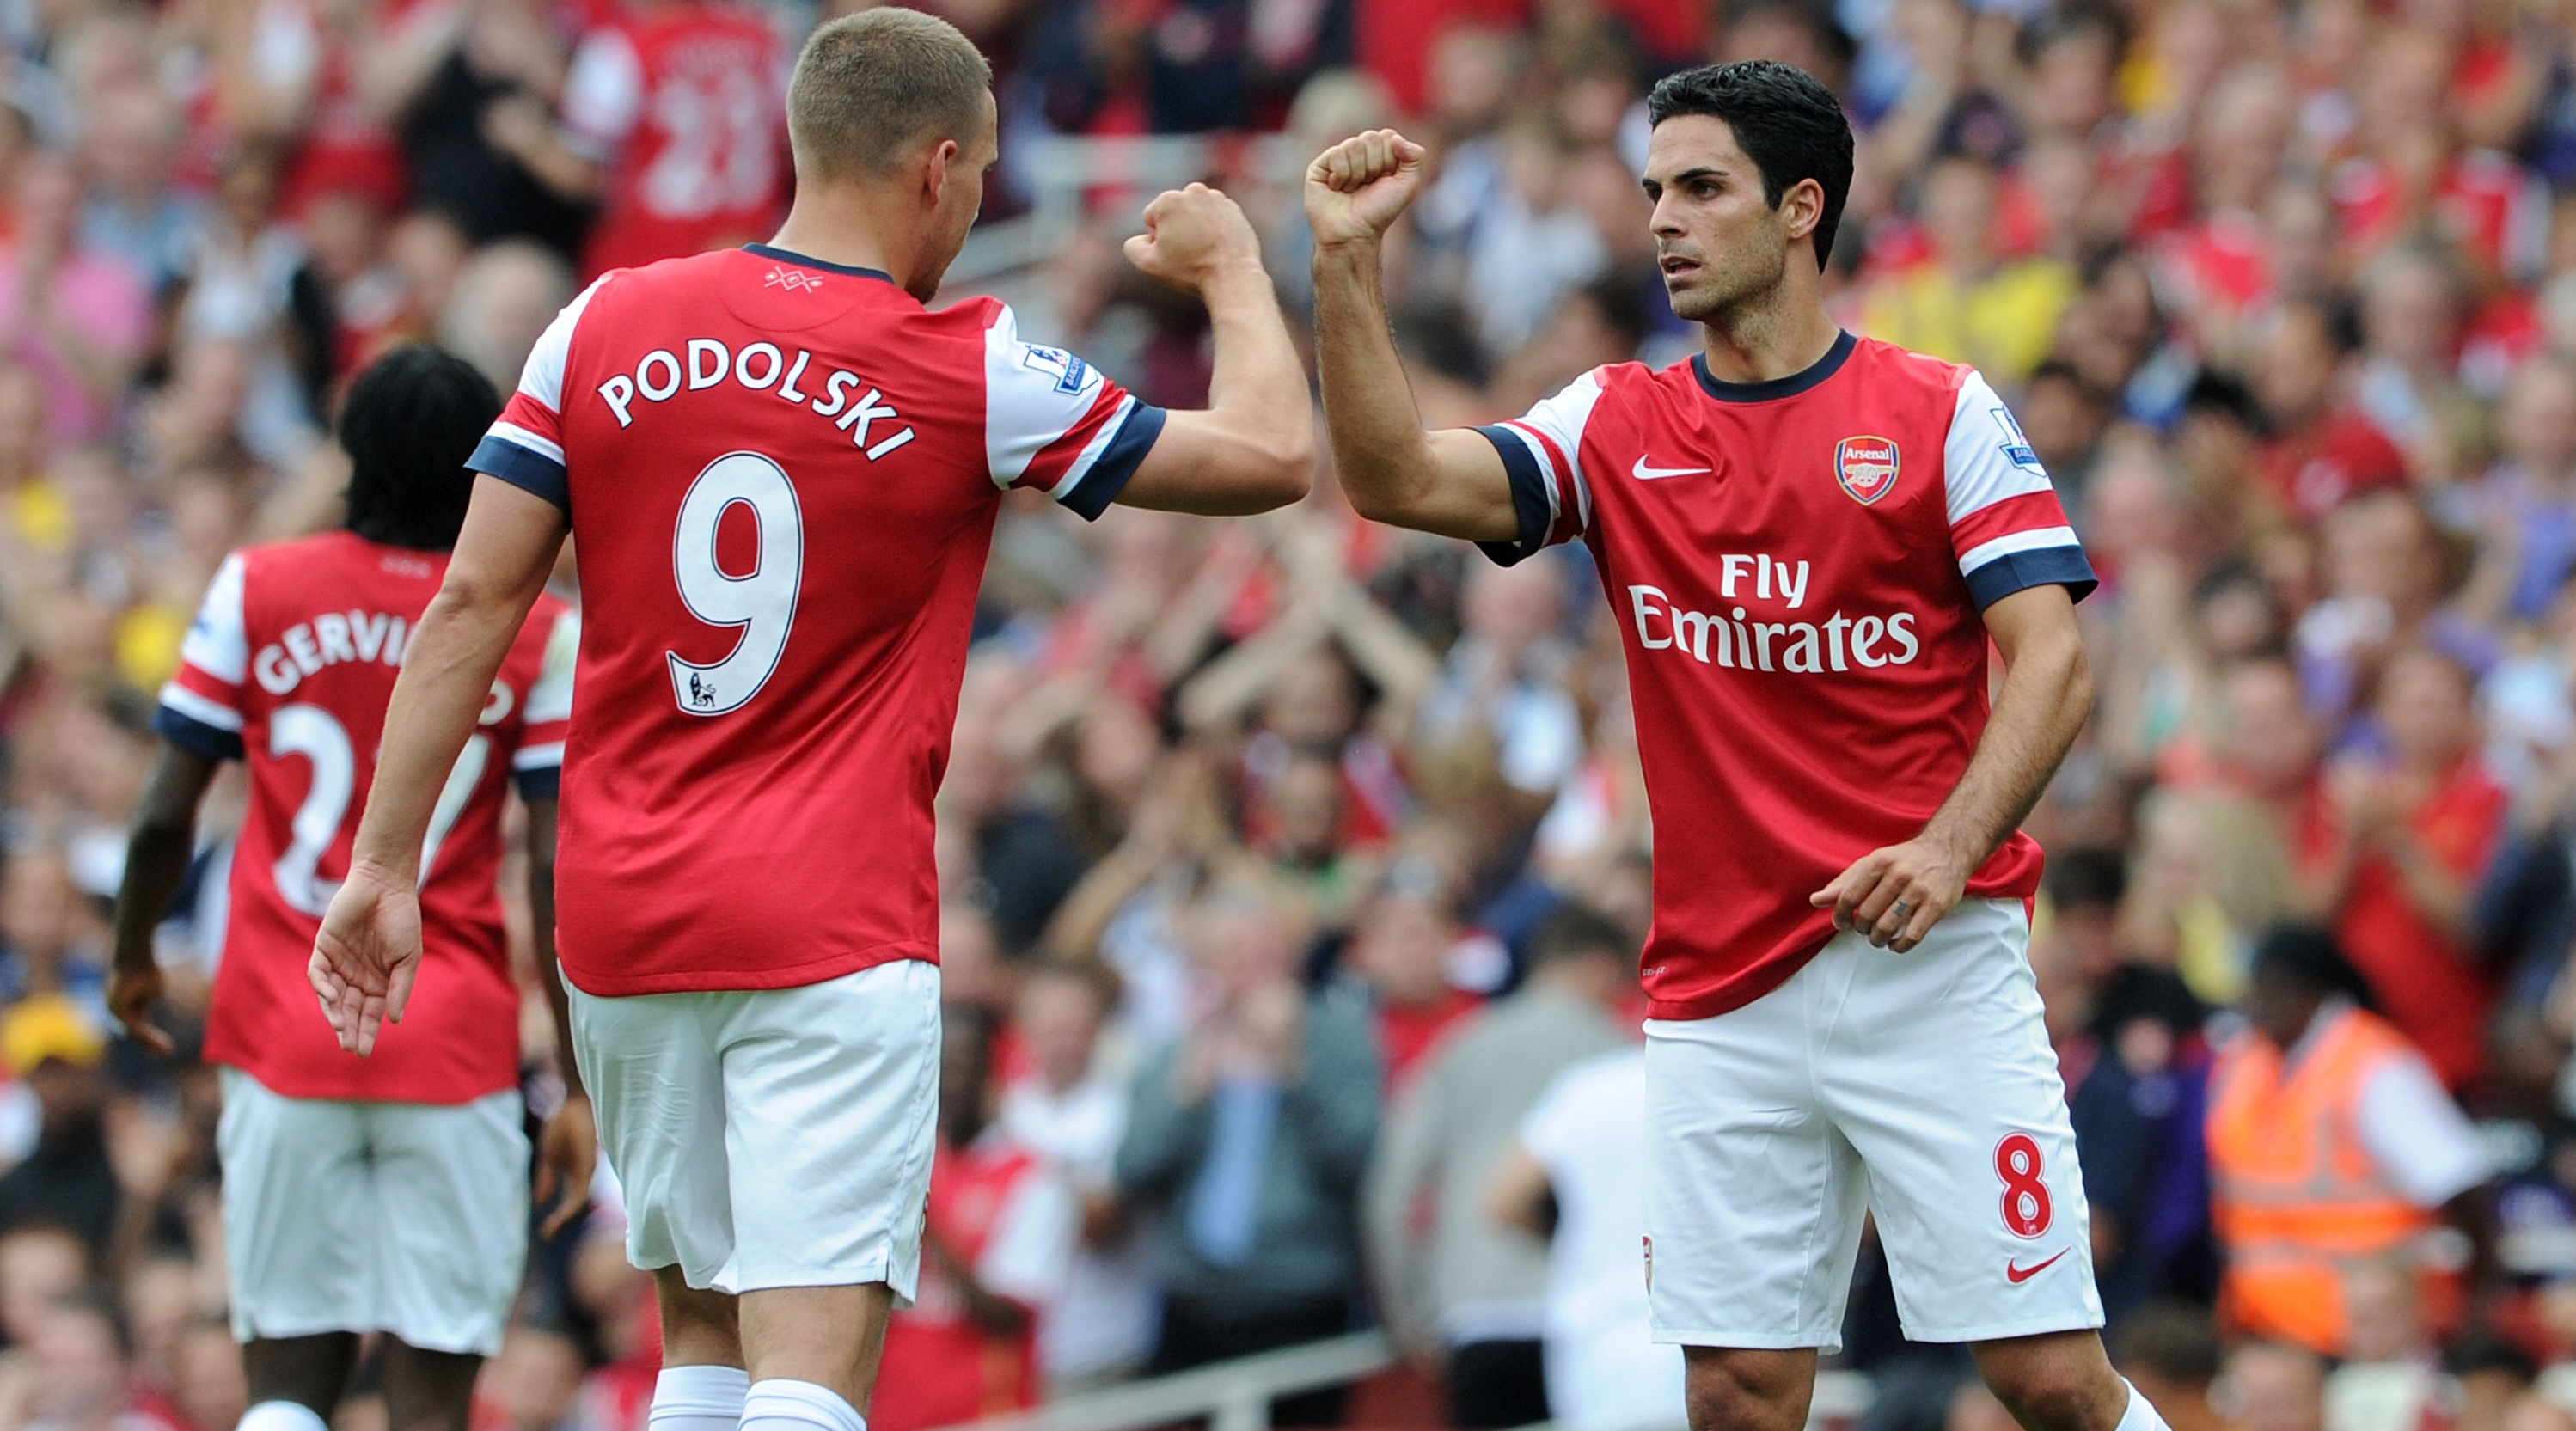 Mikel Arteta always destined to become a manager, says former Arsenal team-mate | FourFourTwo